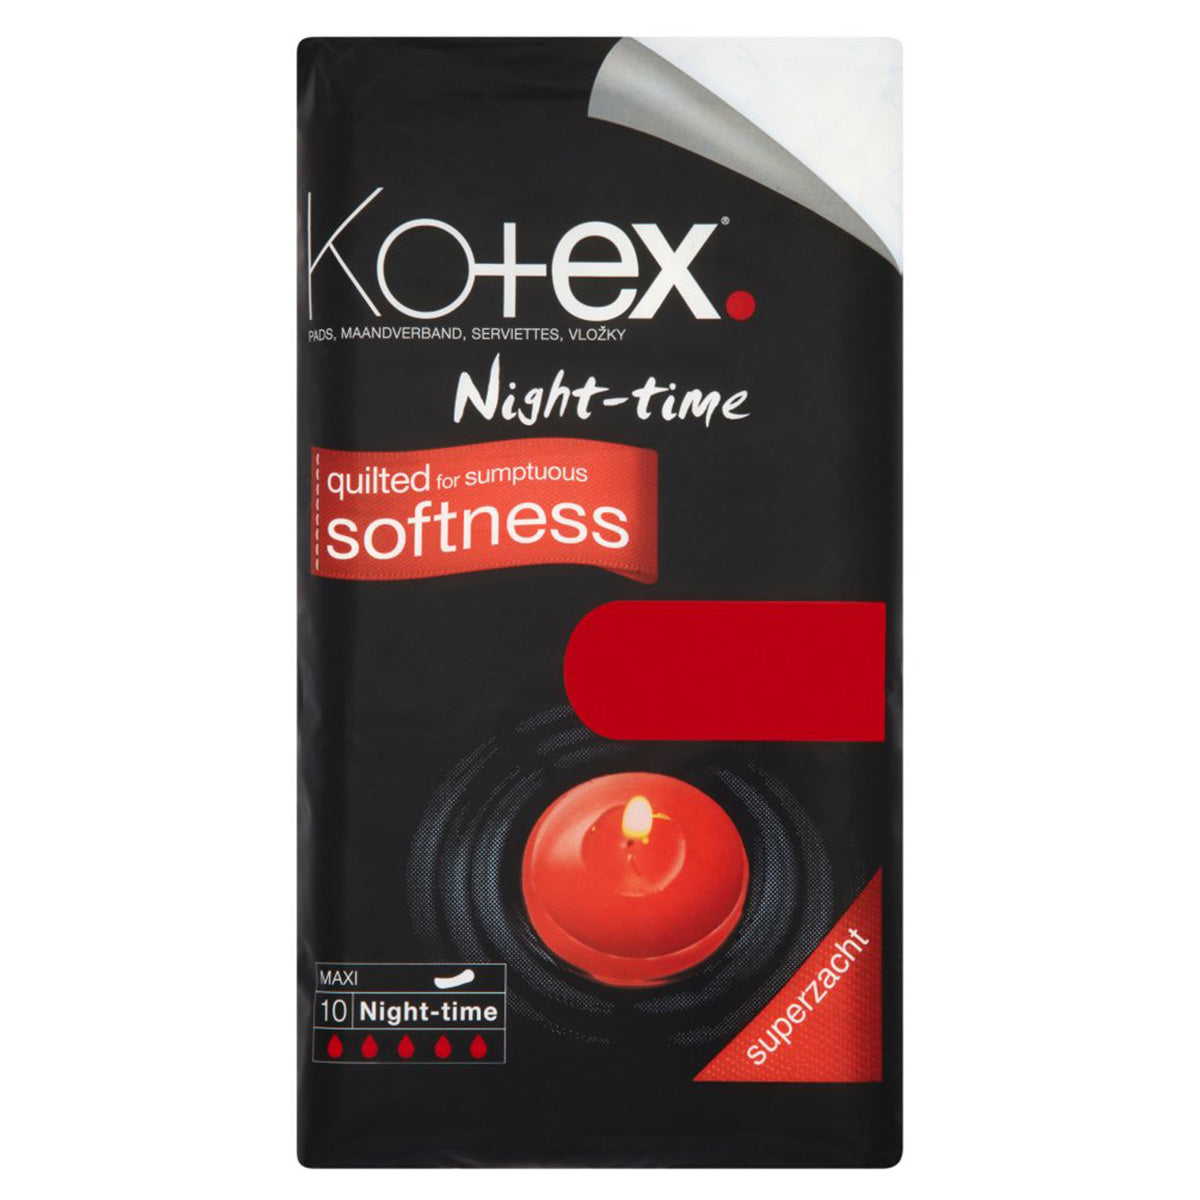 A Kotex - Maxi Night Time Pads - 10 Pads package with a red label.